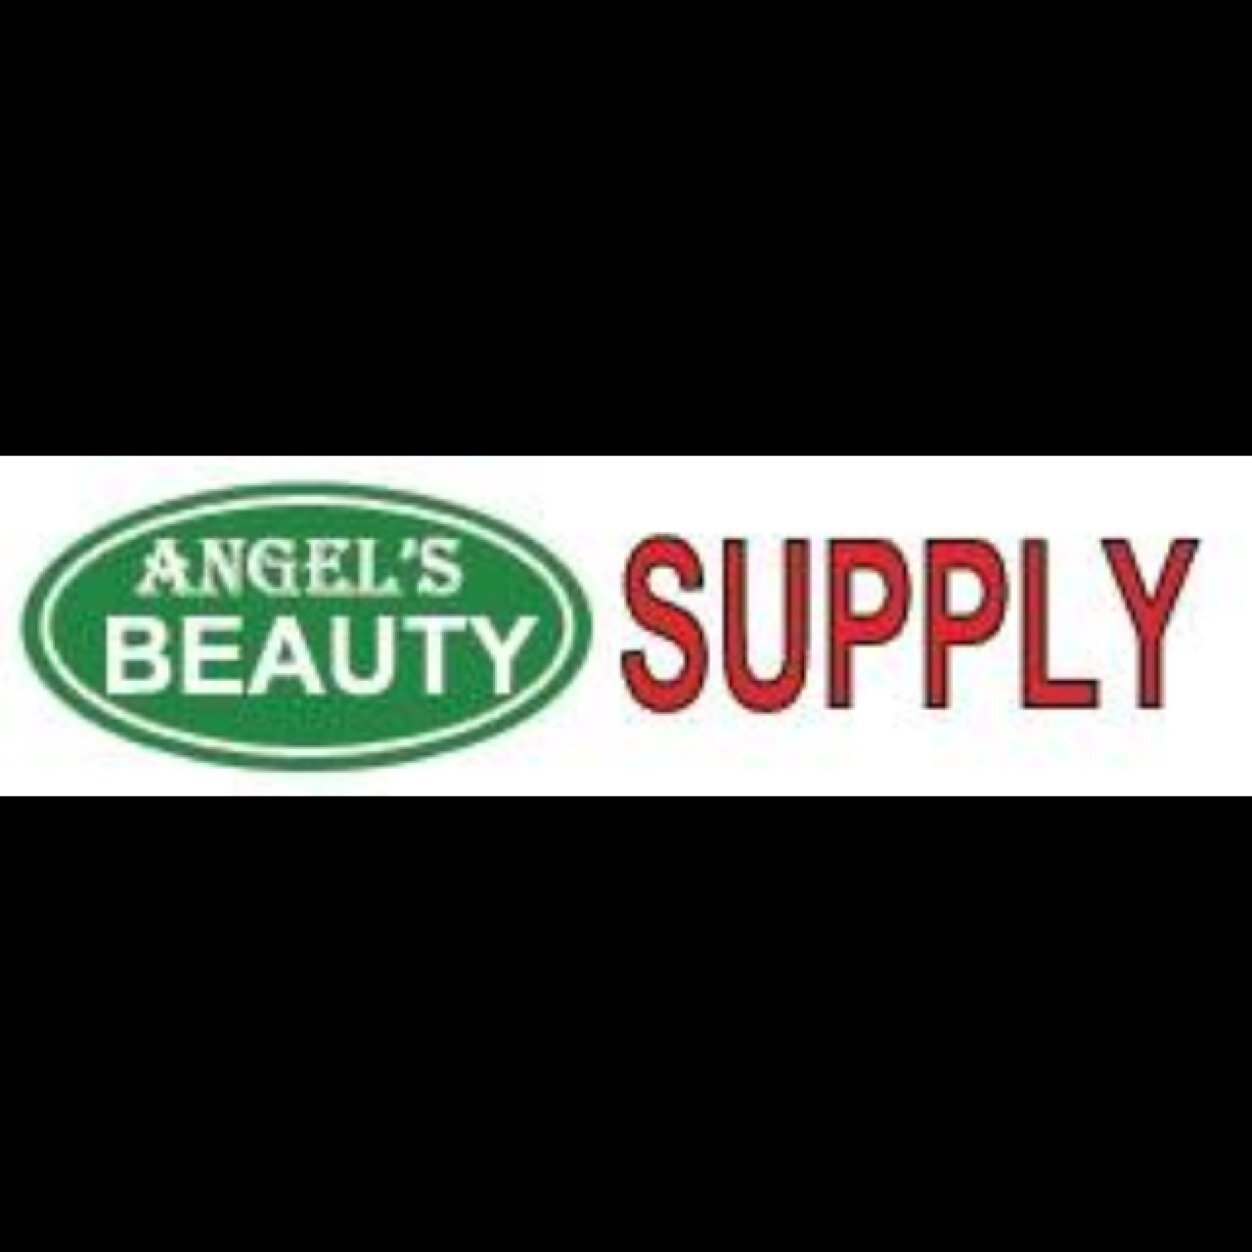 We are a family owned beauty supply store & hair care salon.Serving the Dacula, Auburn, Buford area by offering hair styling, braiding, and beauty services